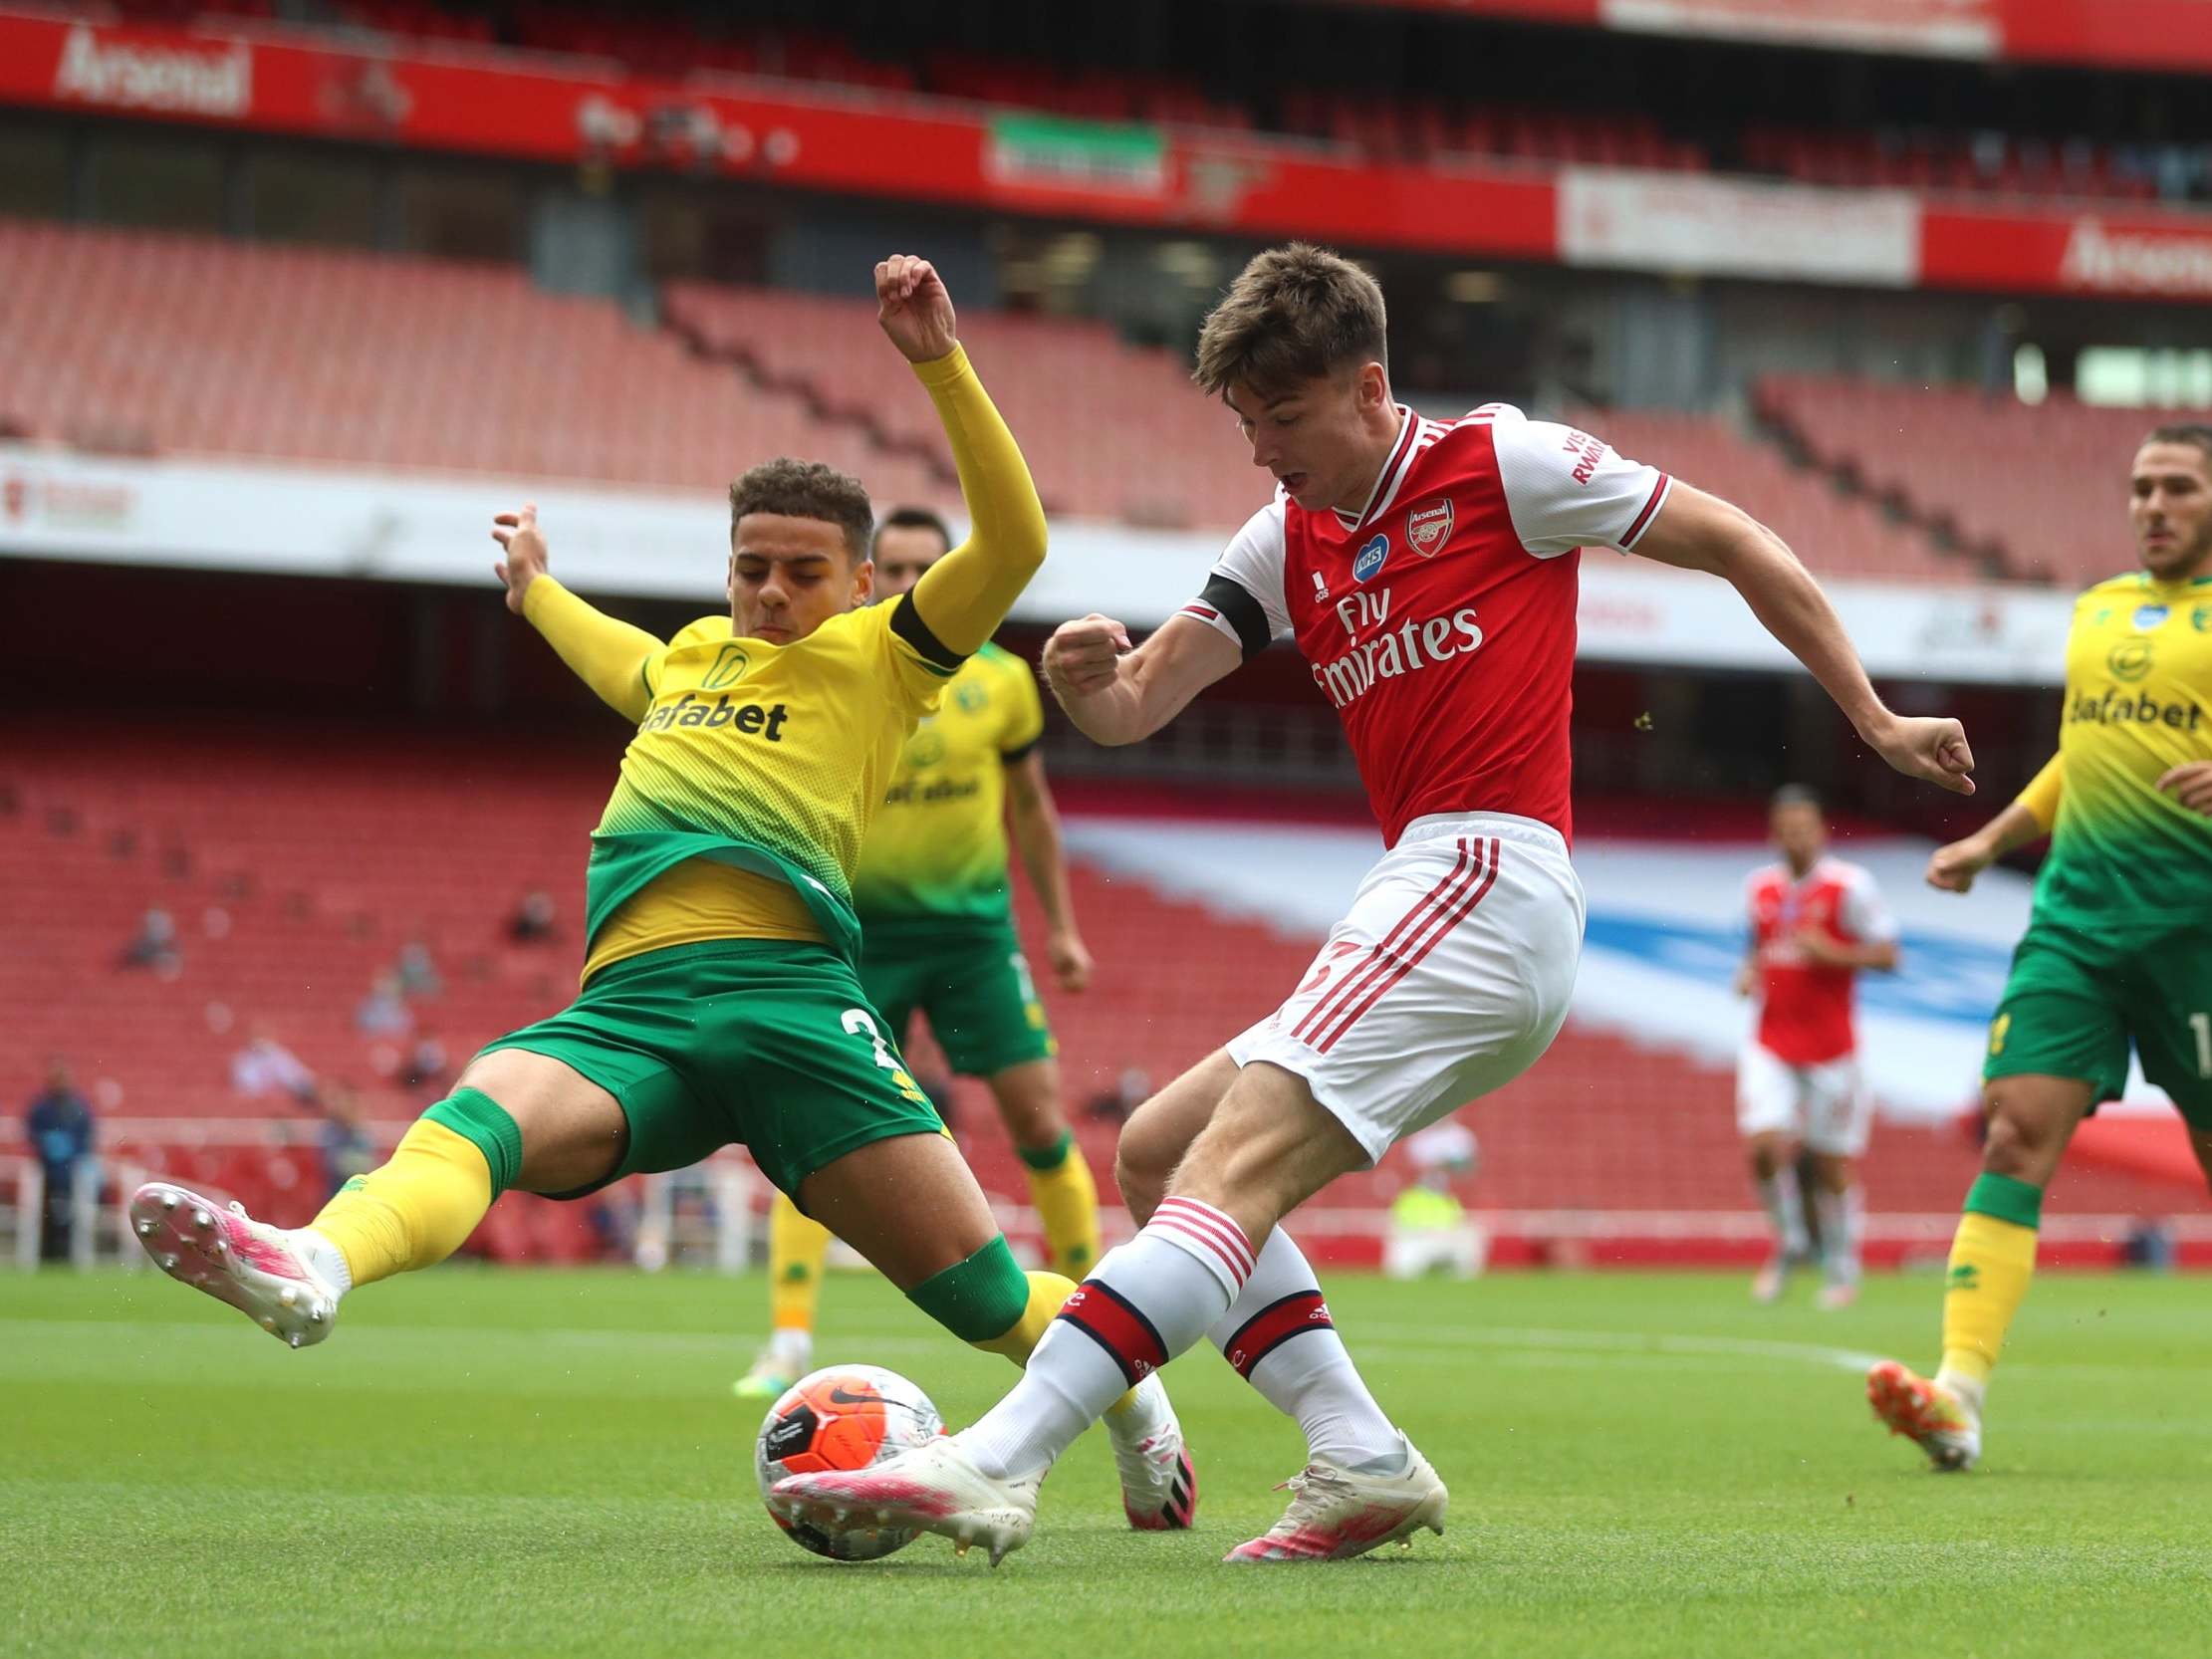 Tierney has impressed since the restart